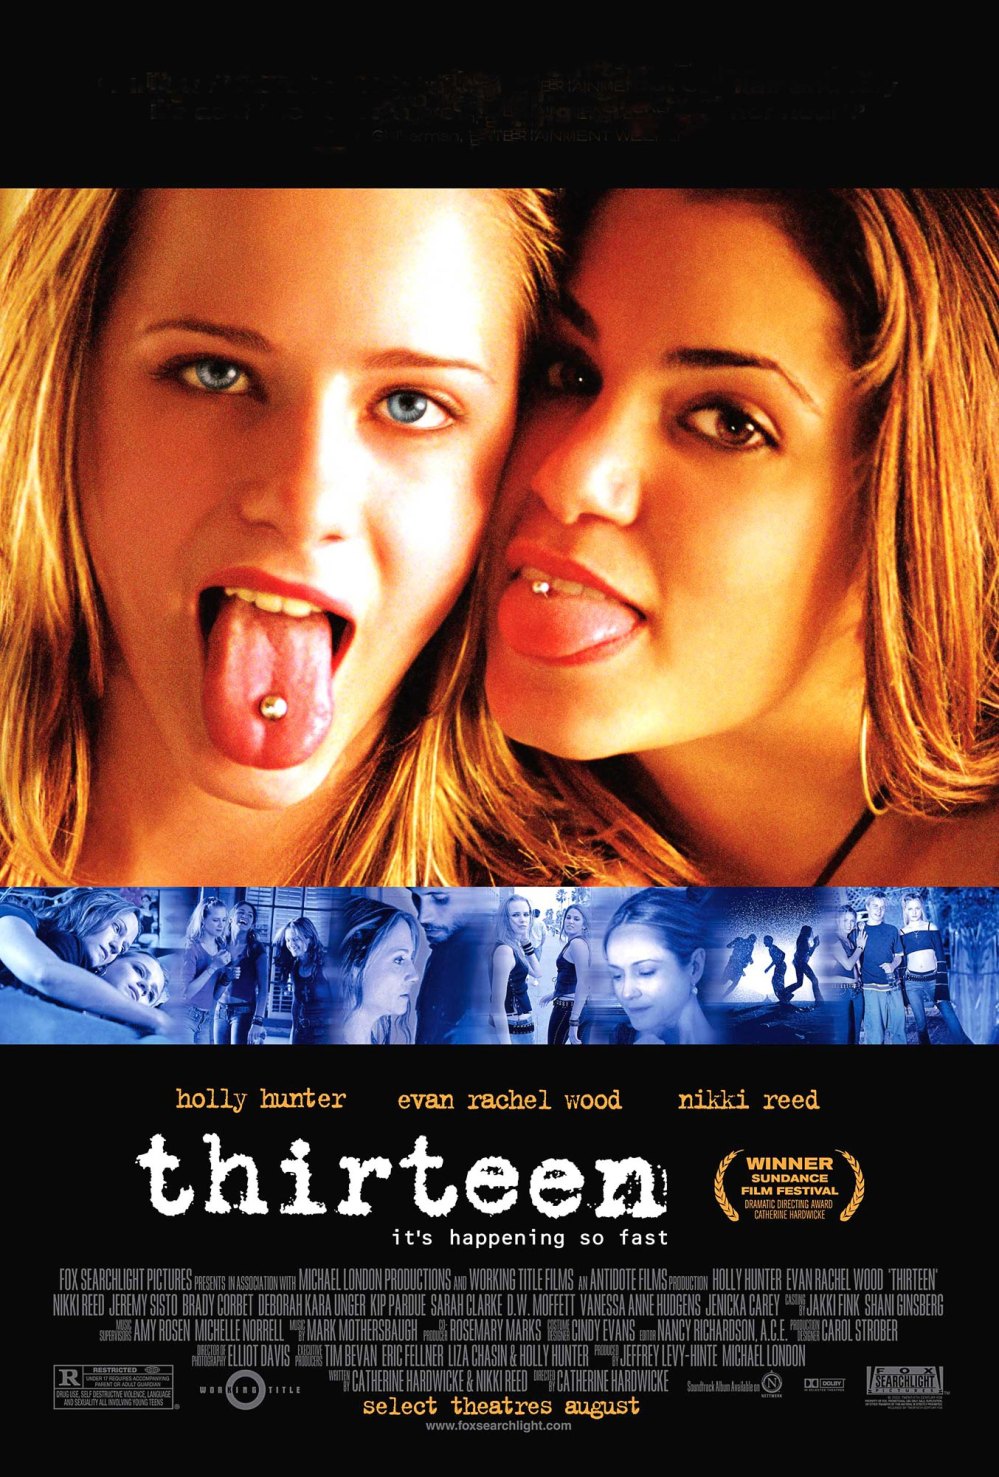 Catherine Hardwicke Was Paid Only $3 to Direct Thirteen Because No Studio Wanted to Produce the Film 300